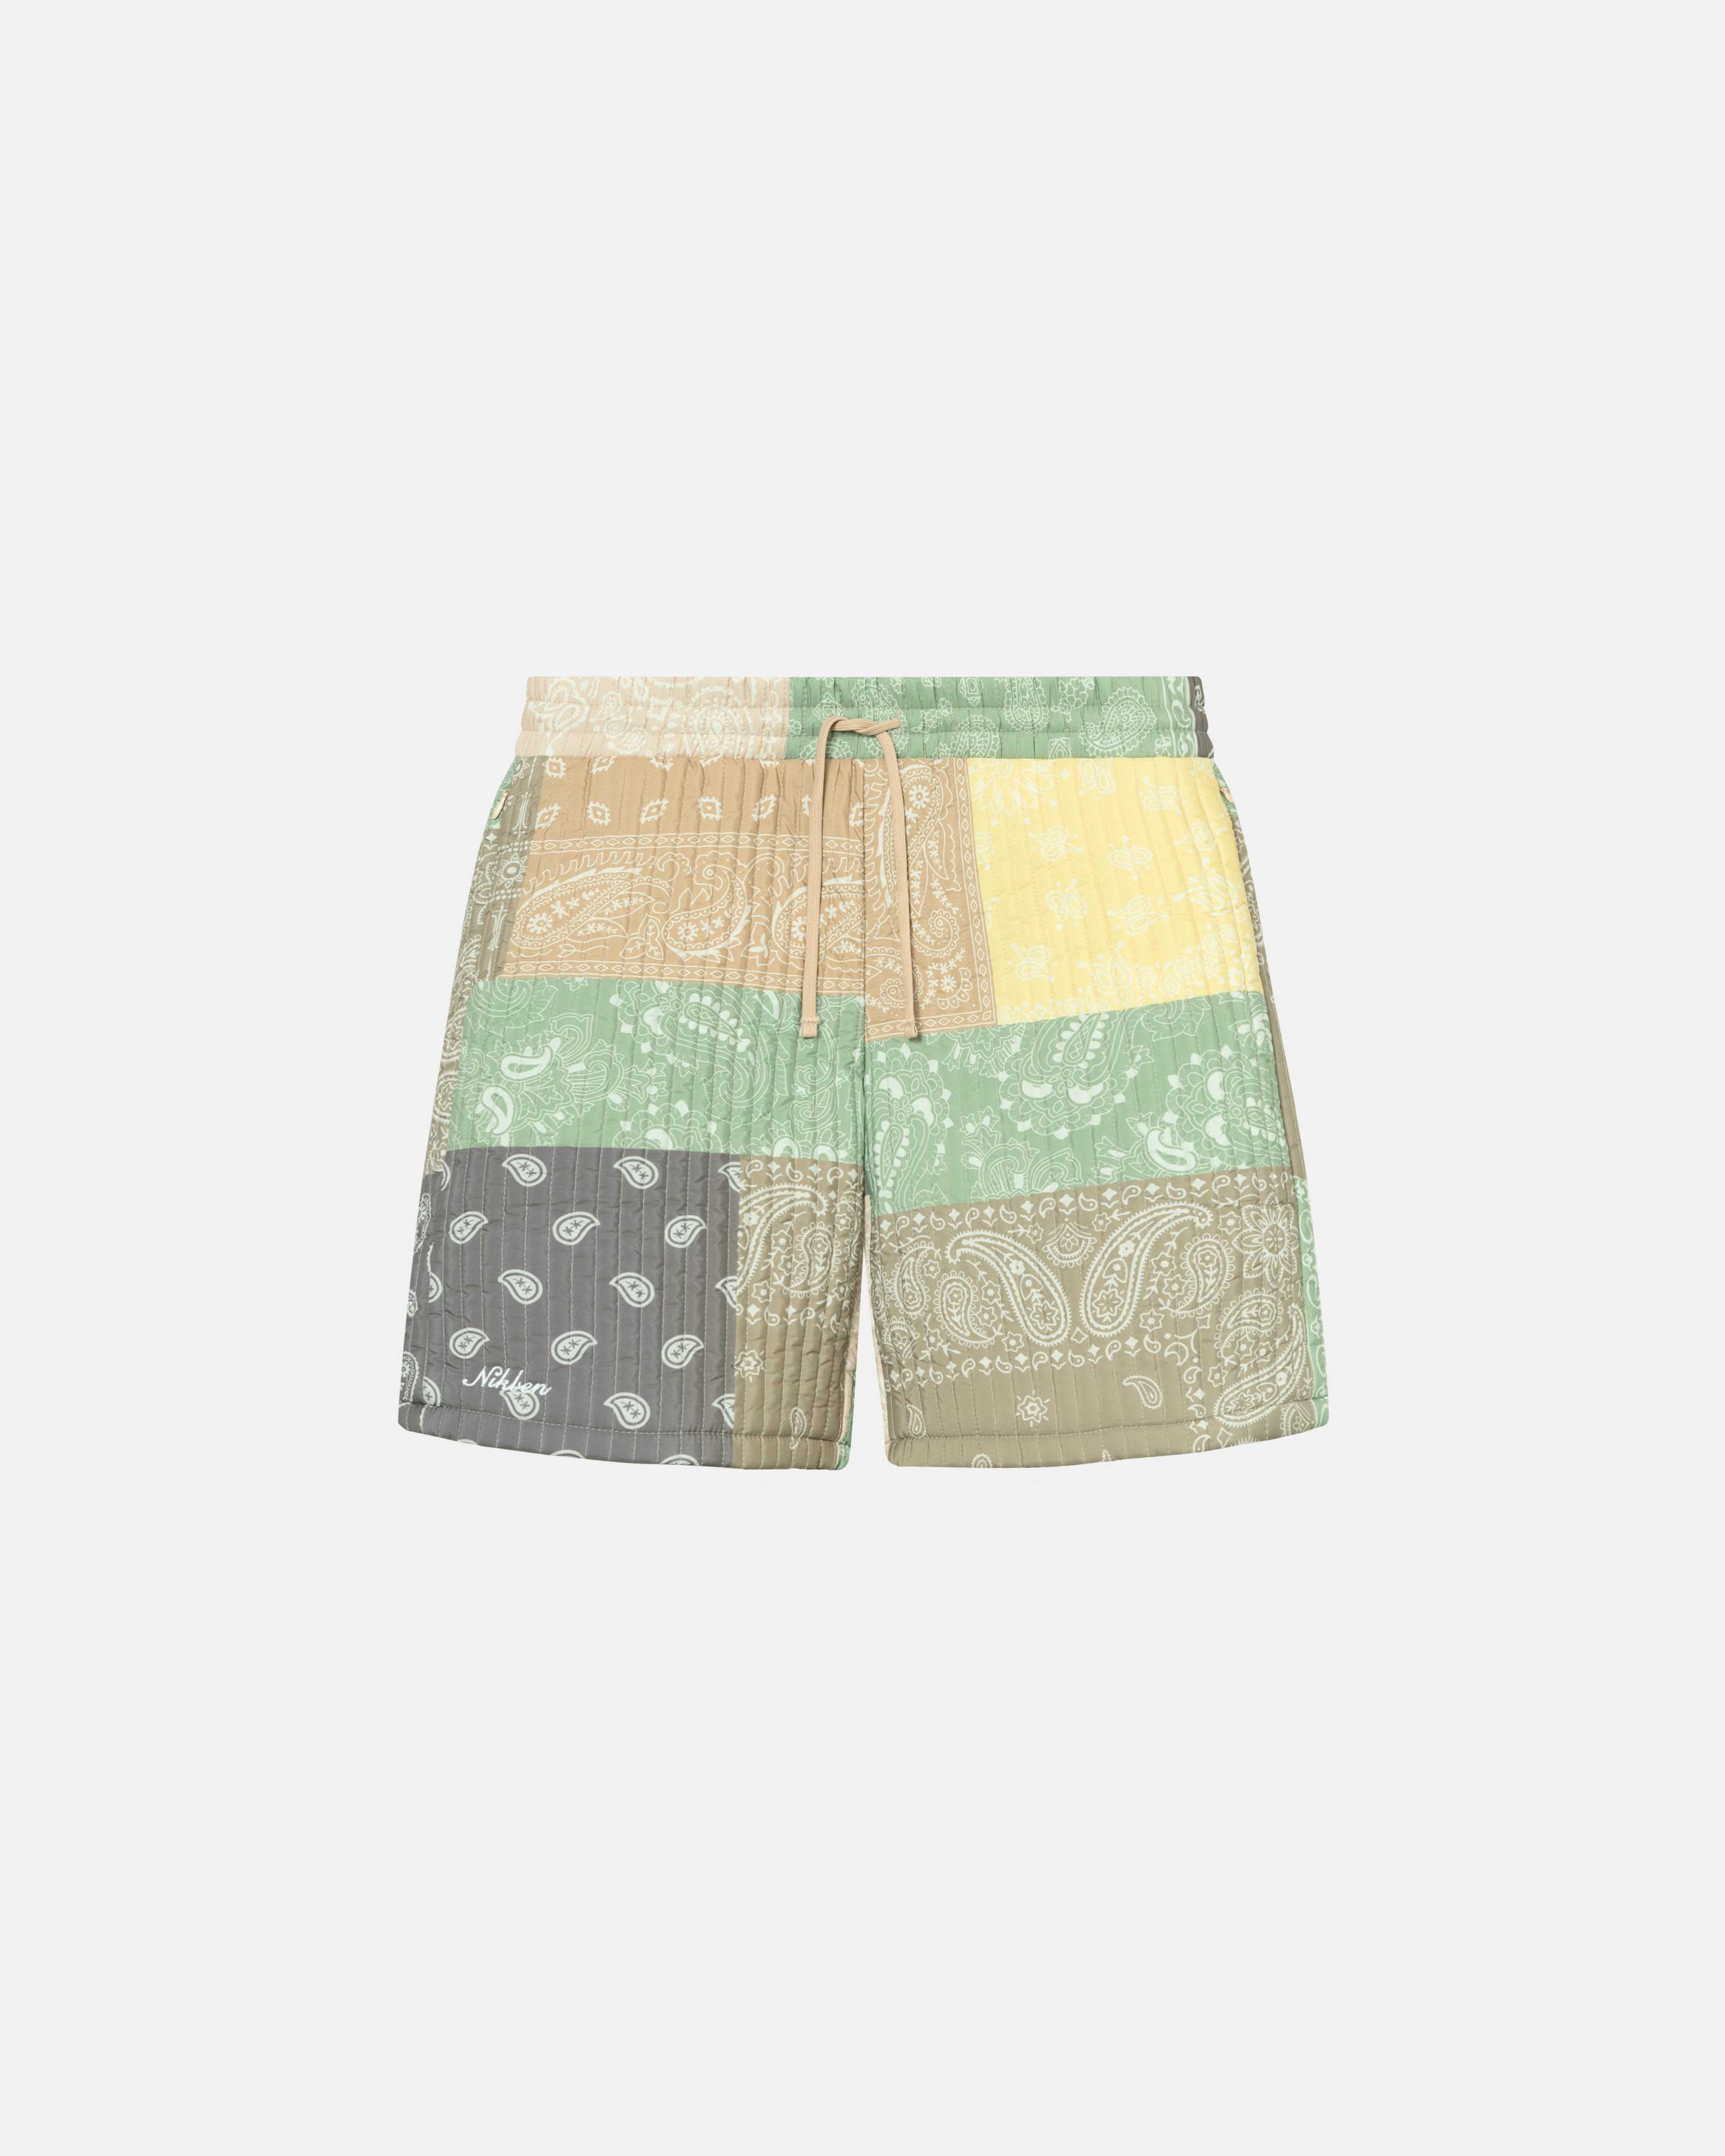 Quilted shorts with elastic drawstrings and multi colored paisley pattern